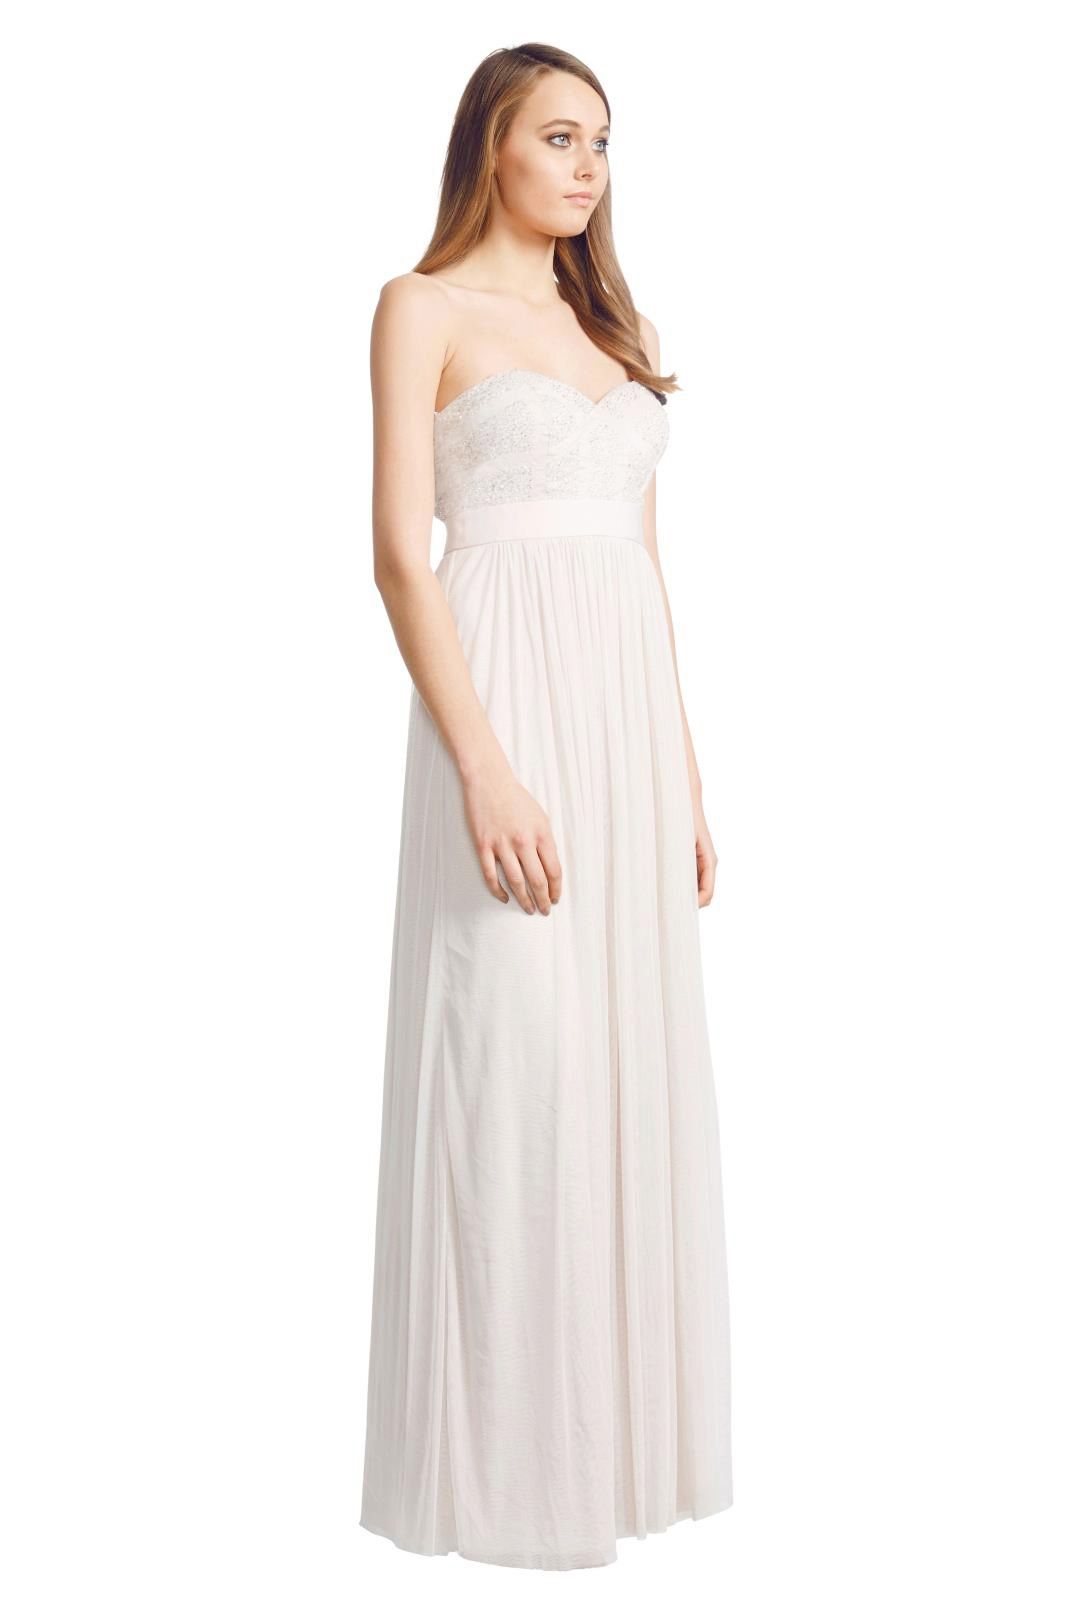 George - Pixel Gown - Shell - Side